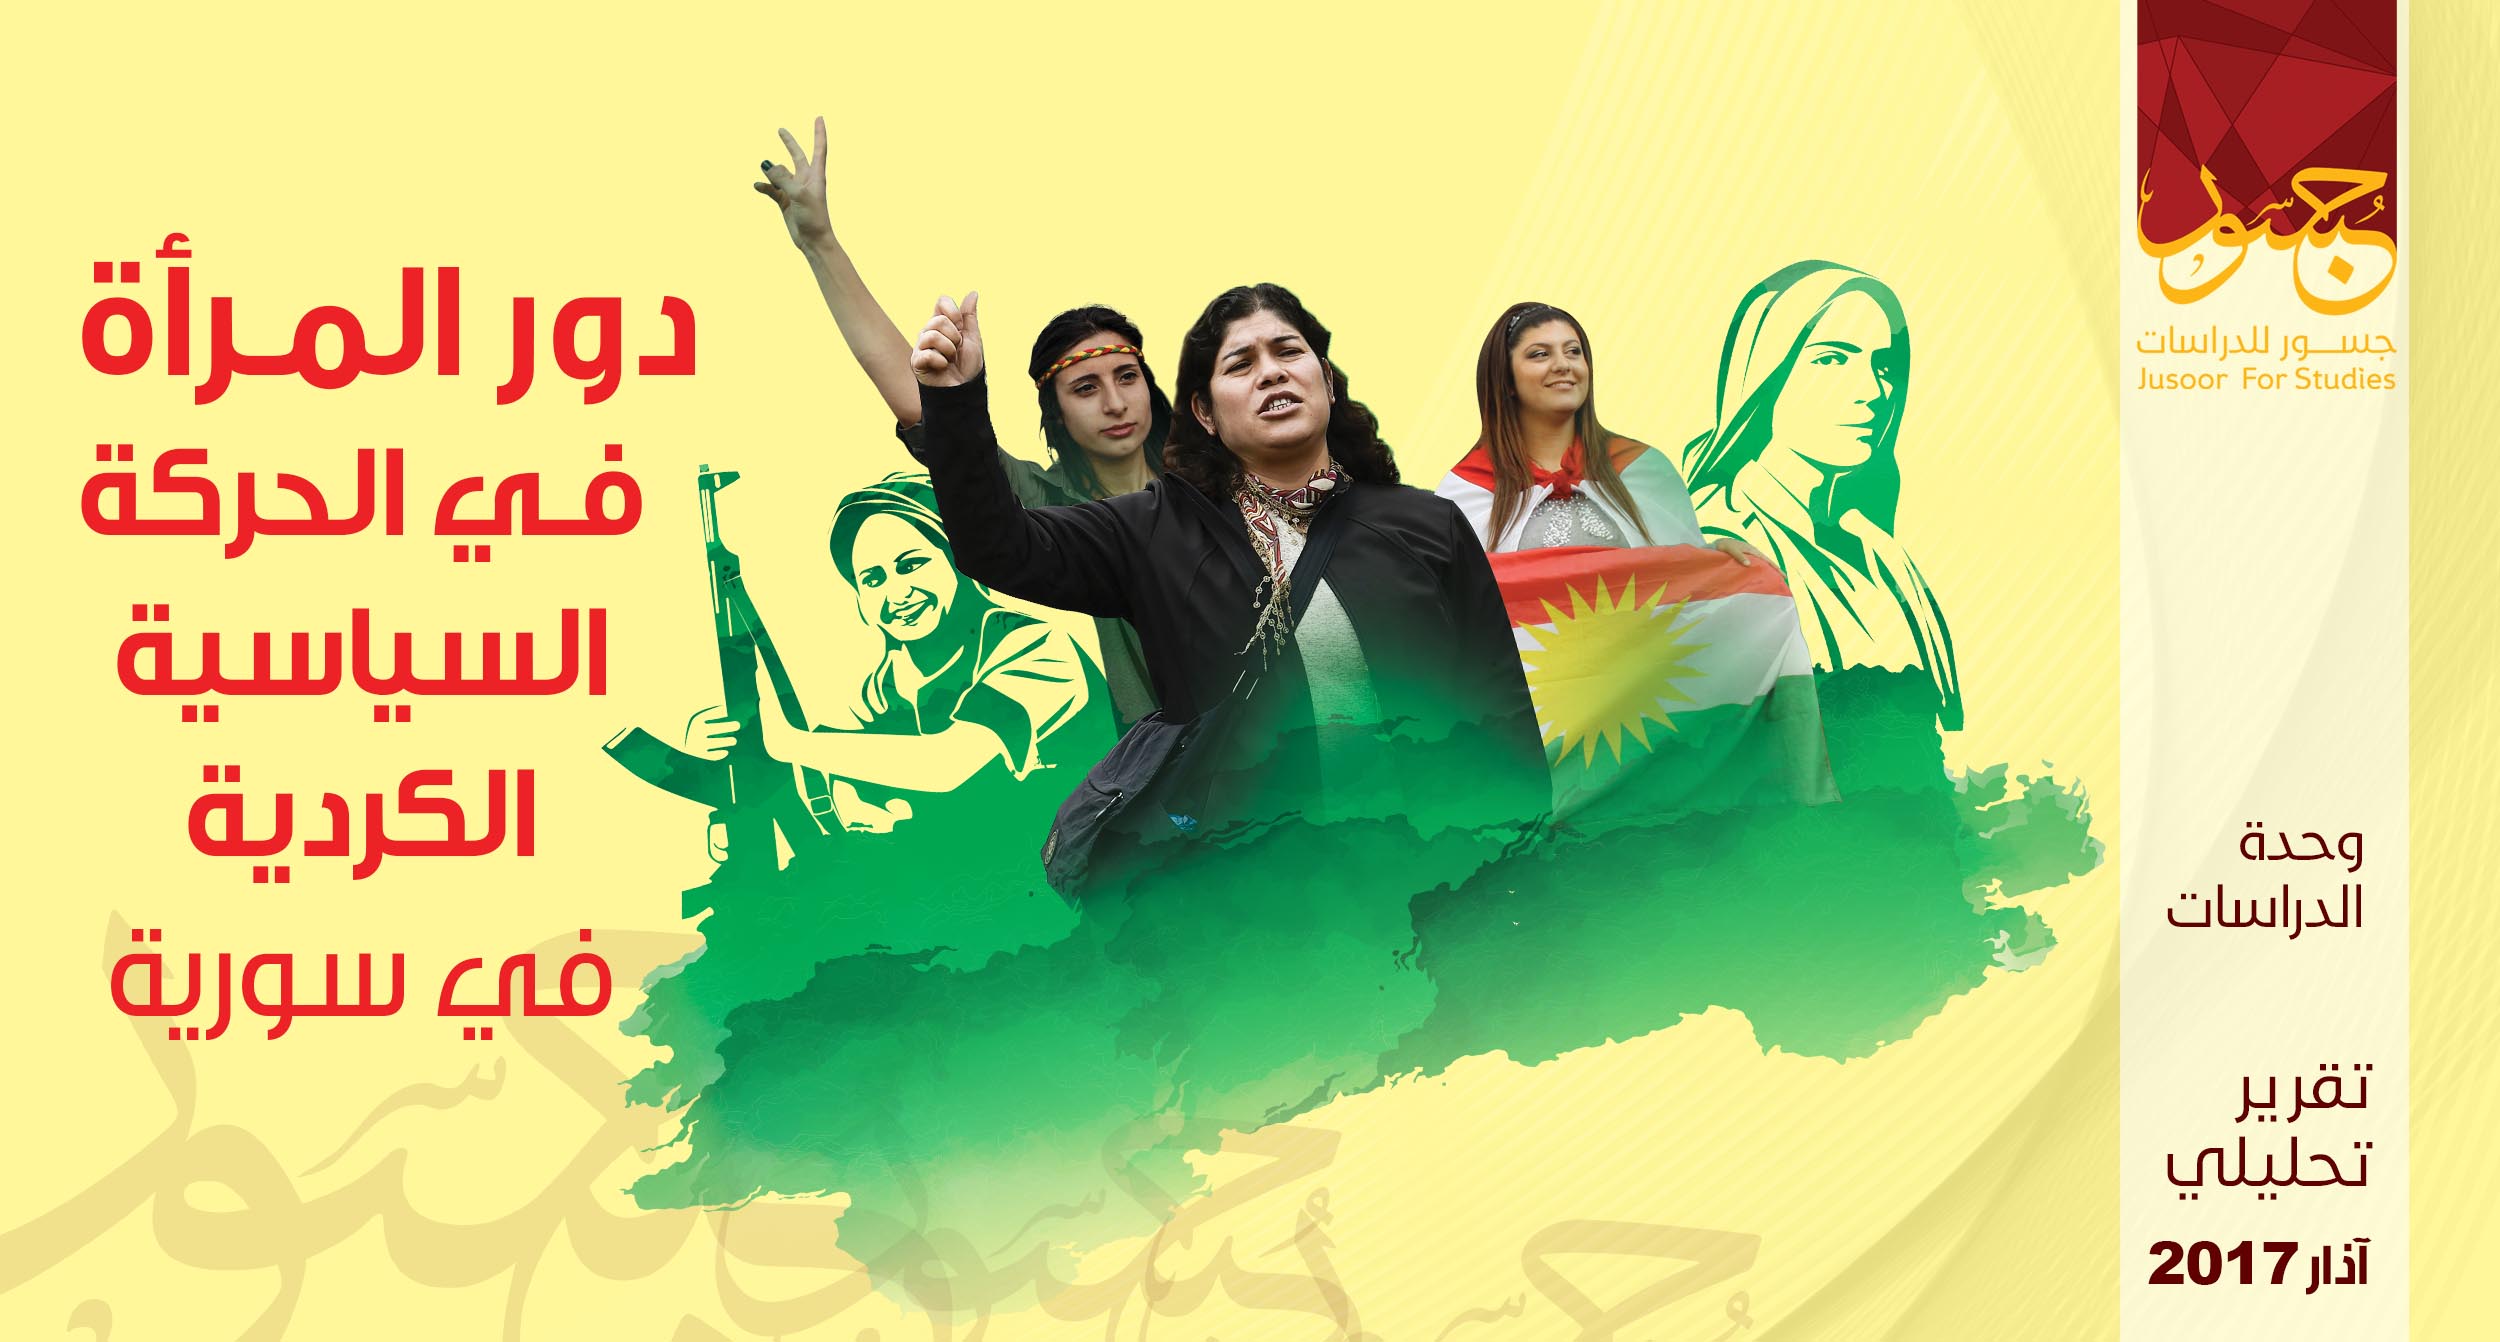 Woman’s role in the Kurdish political movement in Syria